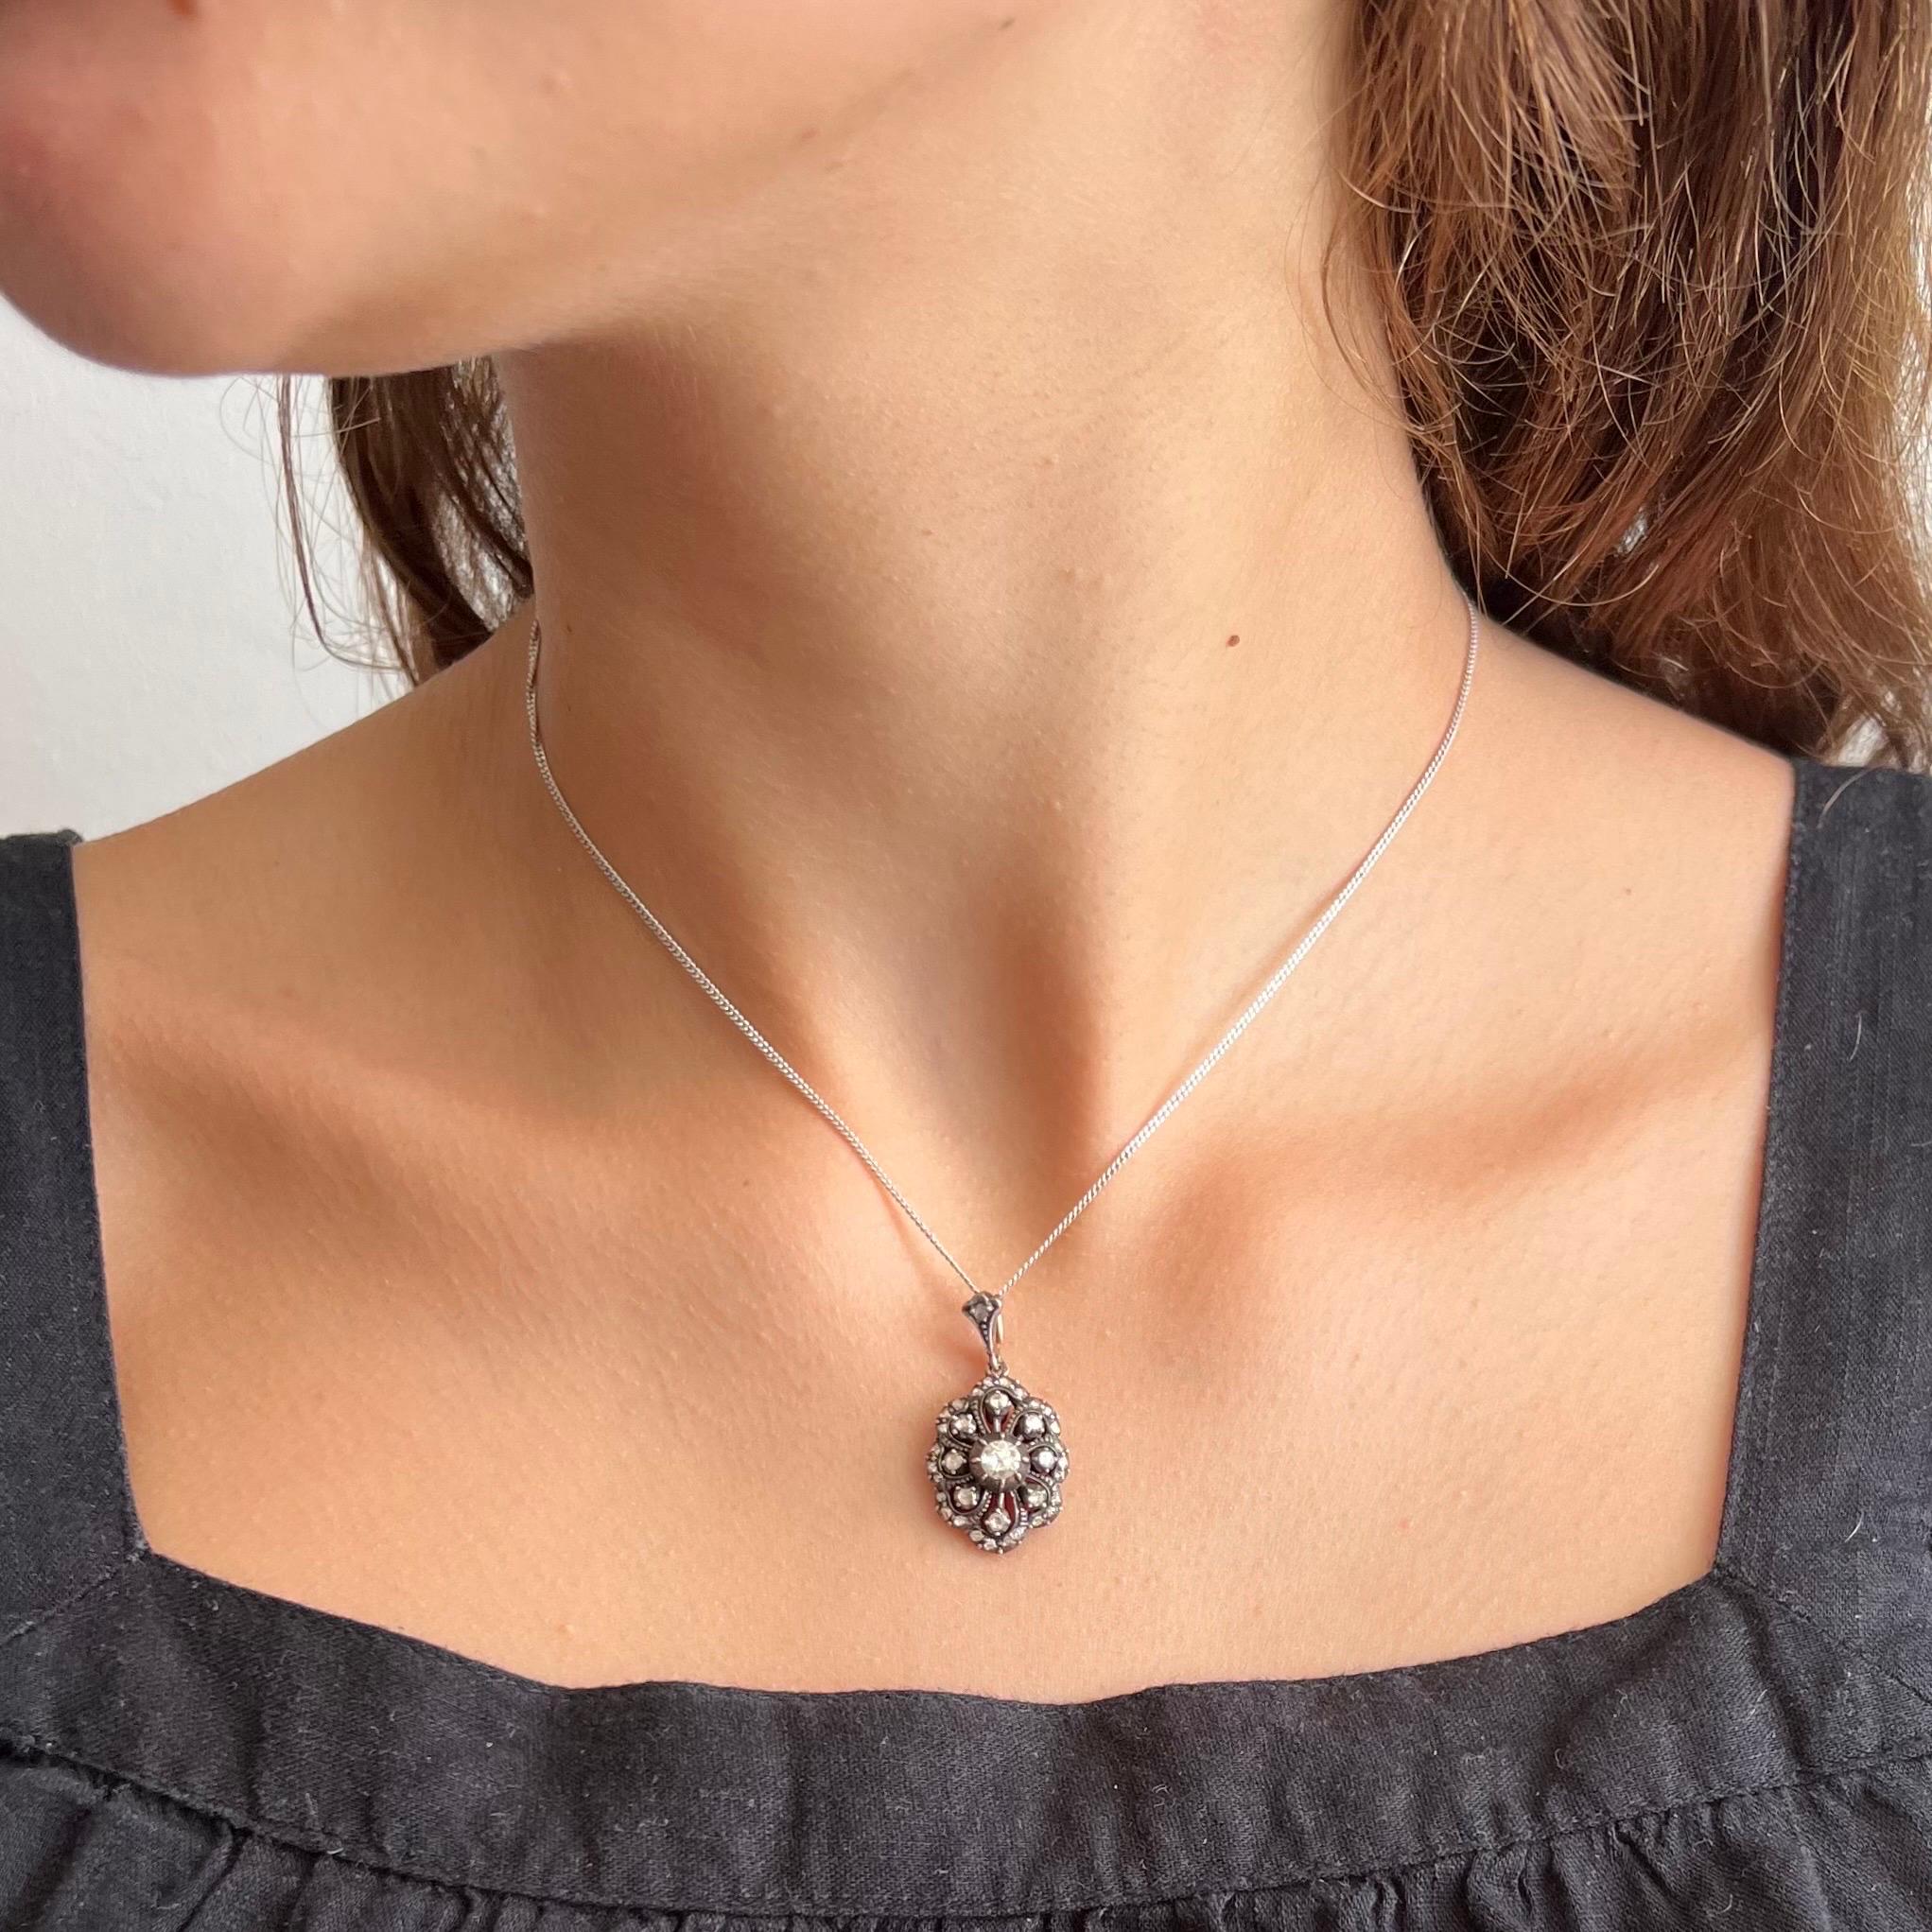 An antique floral rose cut diamond pendant, truly a treasure to behold. This early 20th Century oval-shaped pendant is created with many bright rose cut diamonds set in a silver and gold frame. The diamonds are set in a silver raised dome shaped